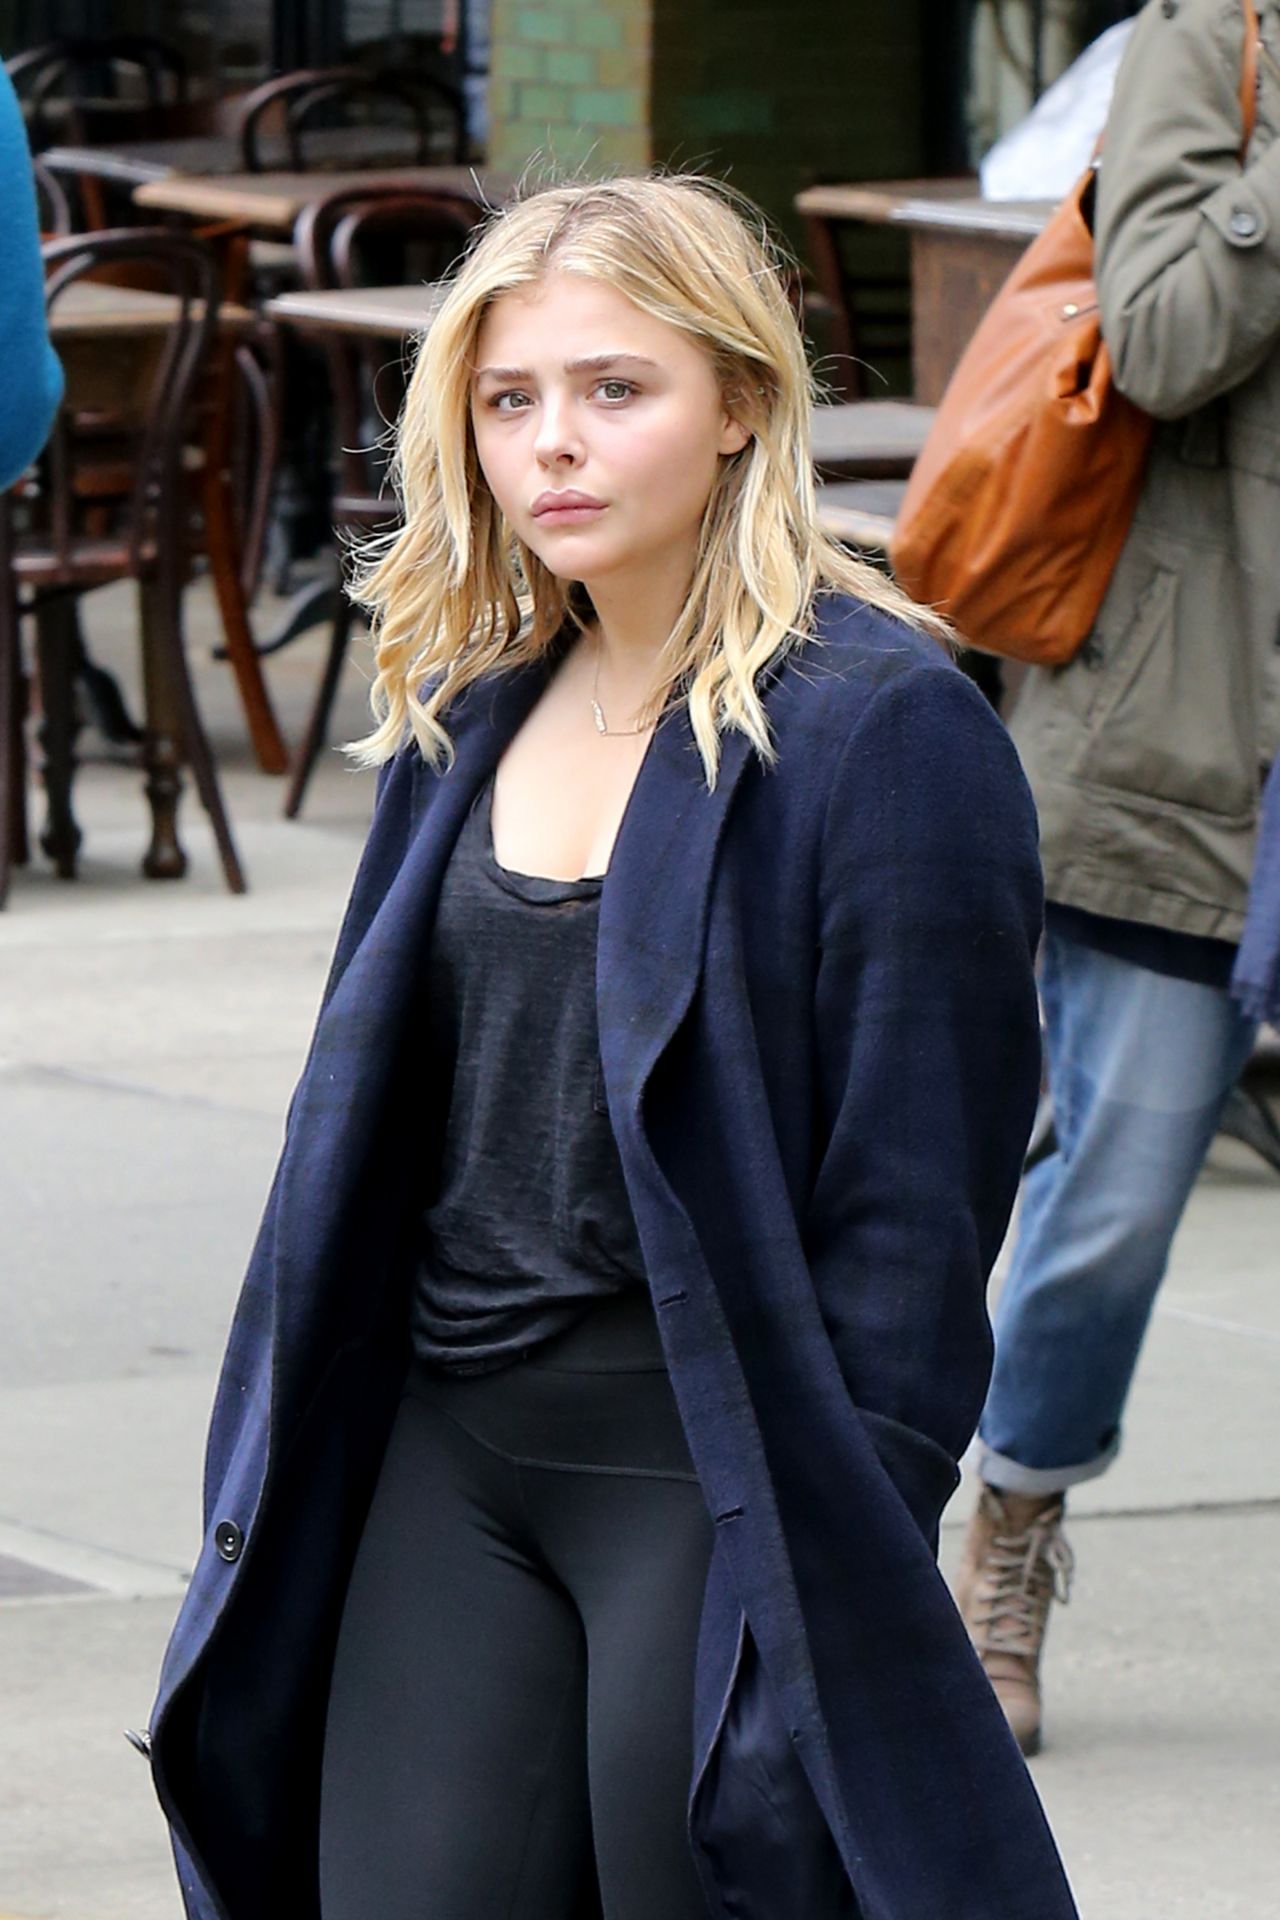 CHLOE MORETZ at The Coach Fashion Show in New York 09//15 